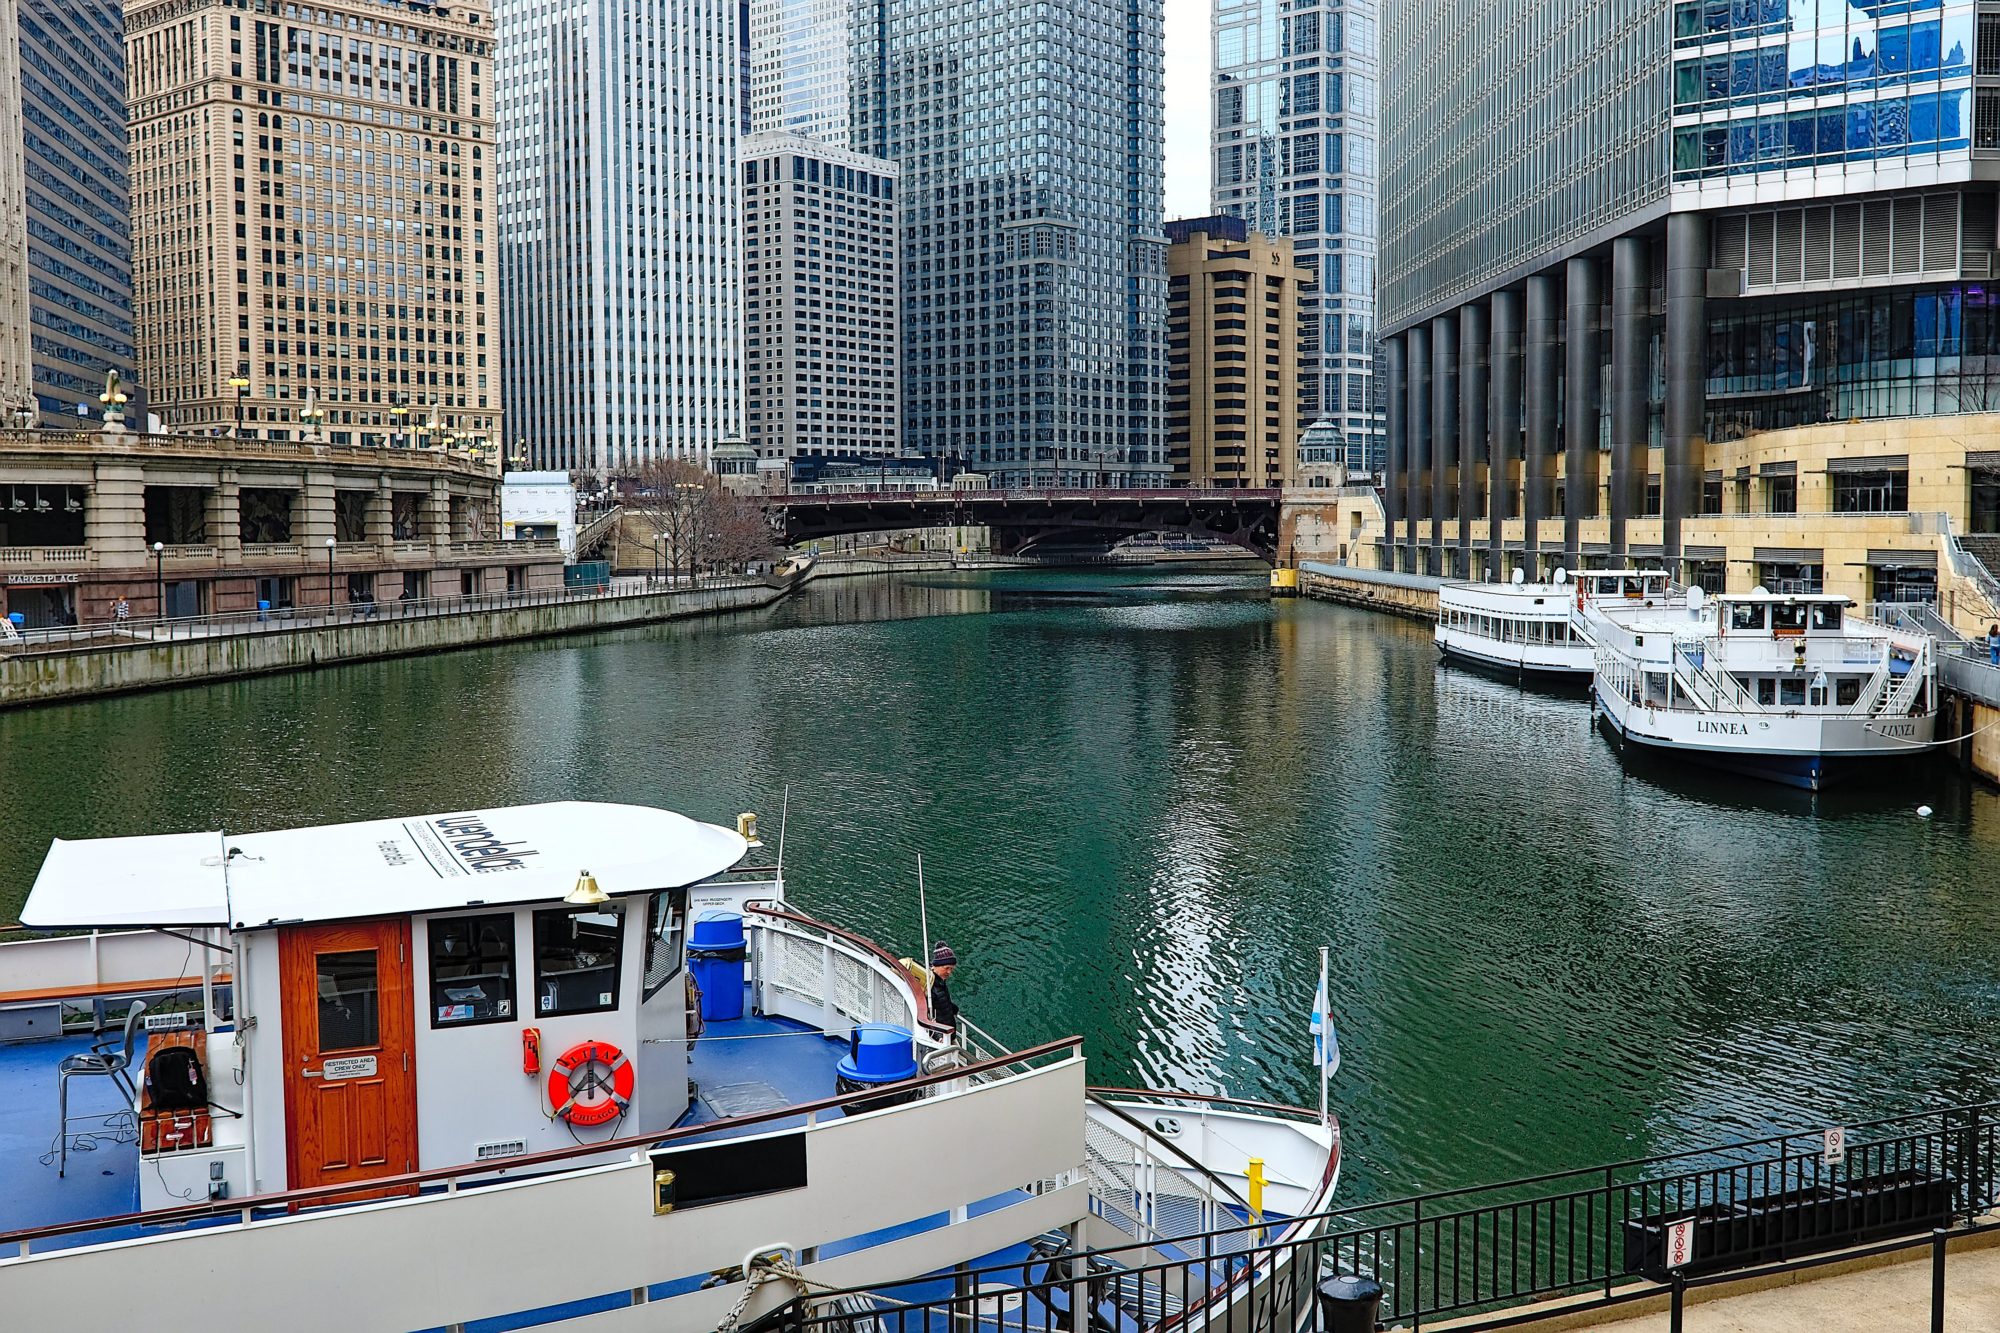 Wendella Boats are docked in the Chicago River